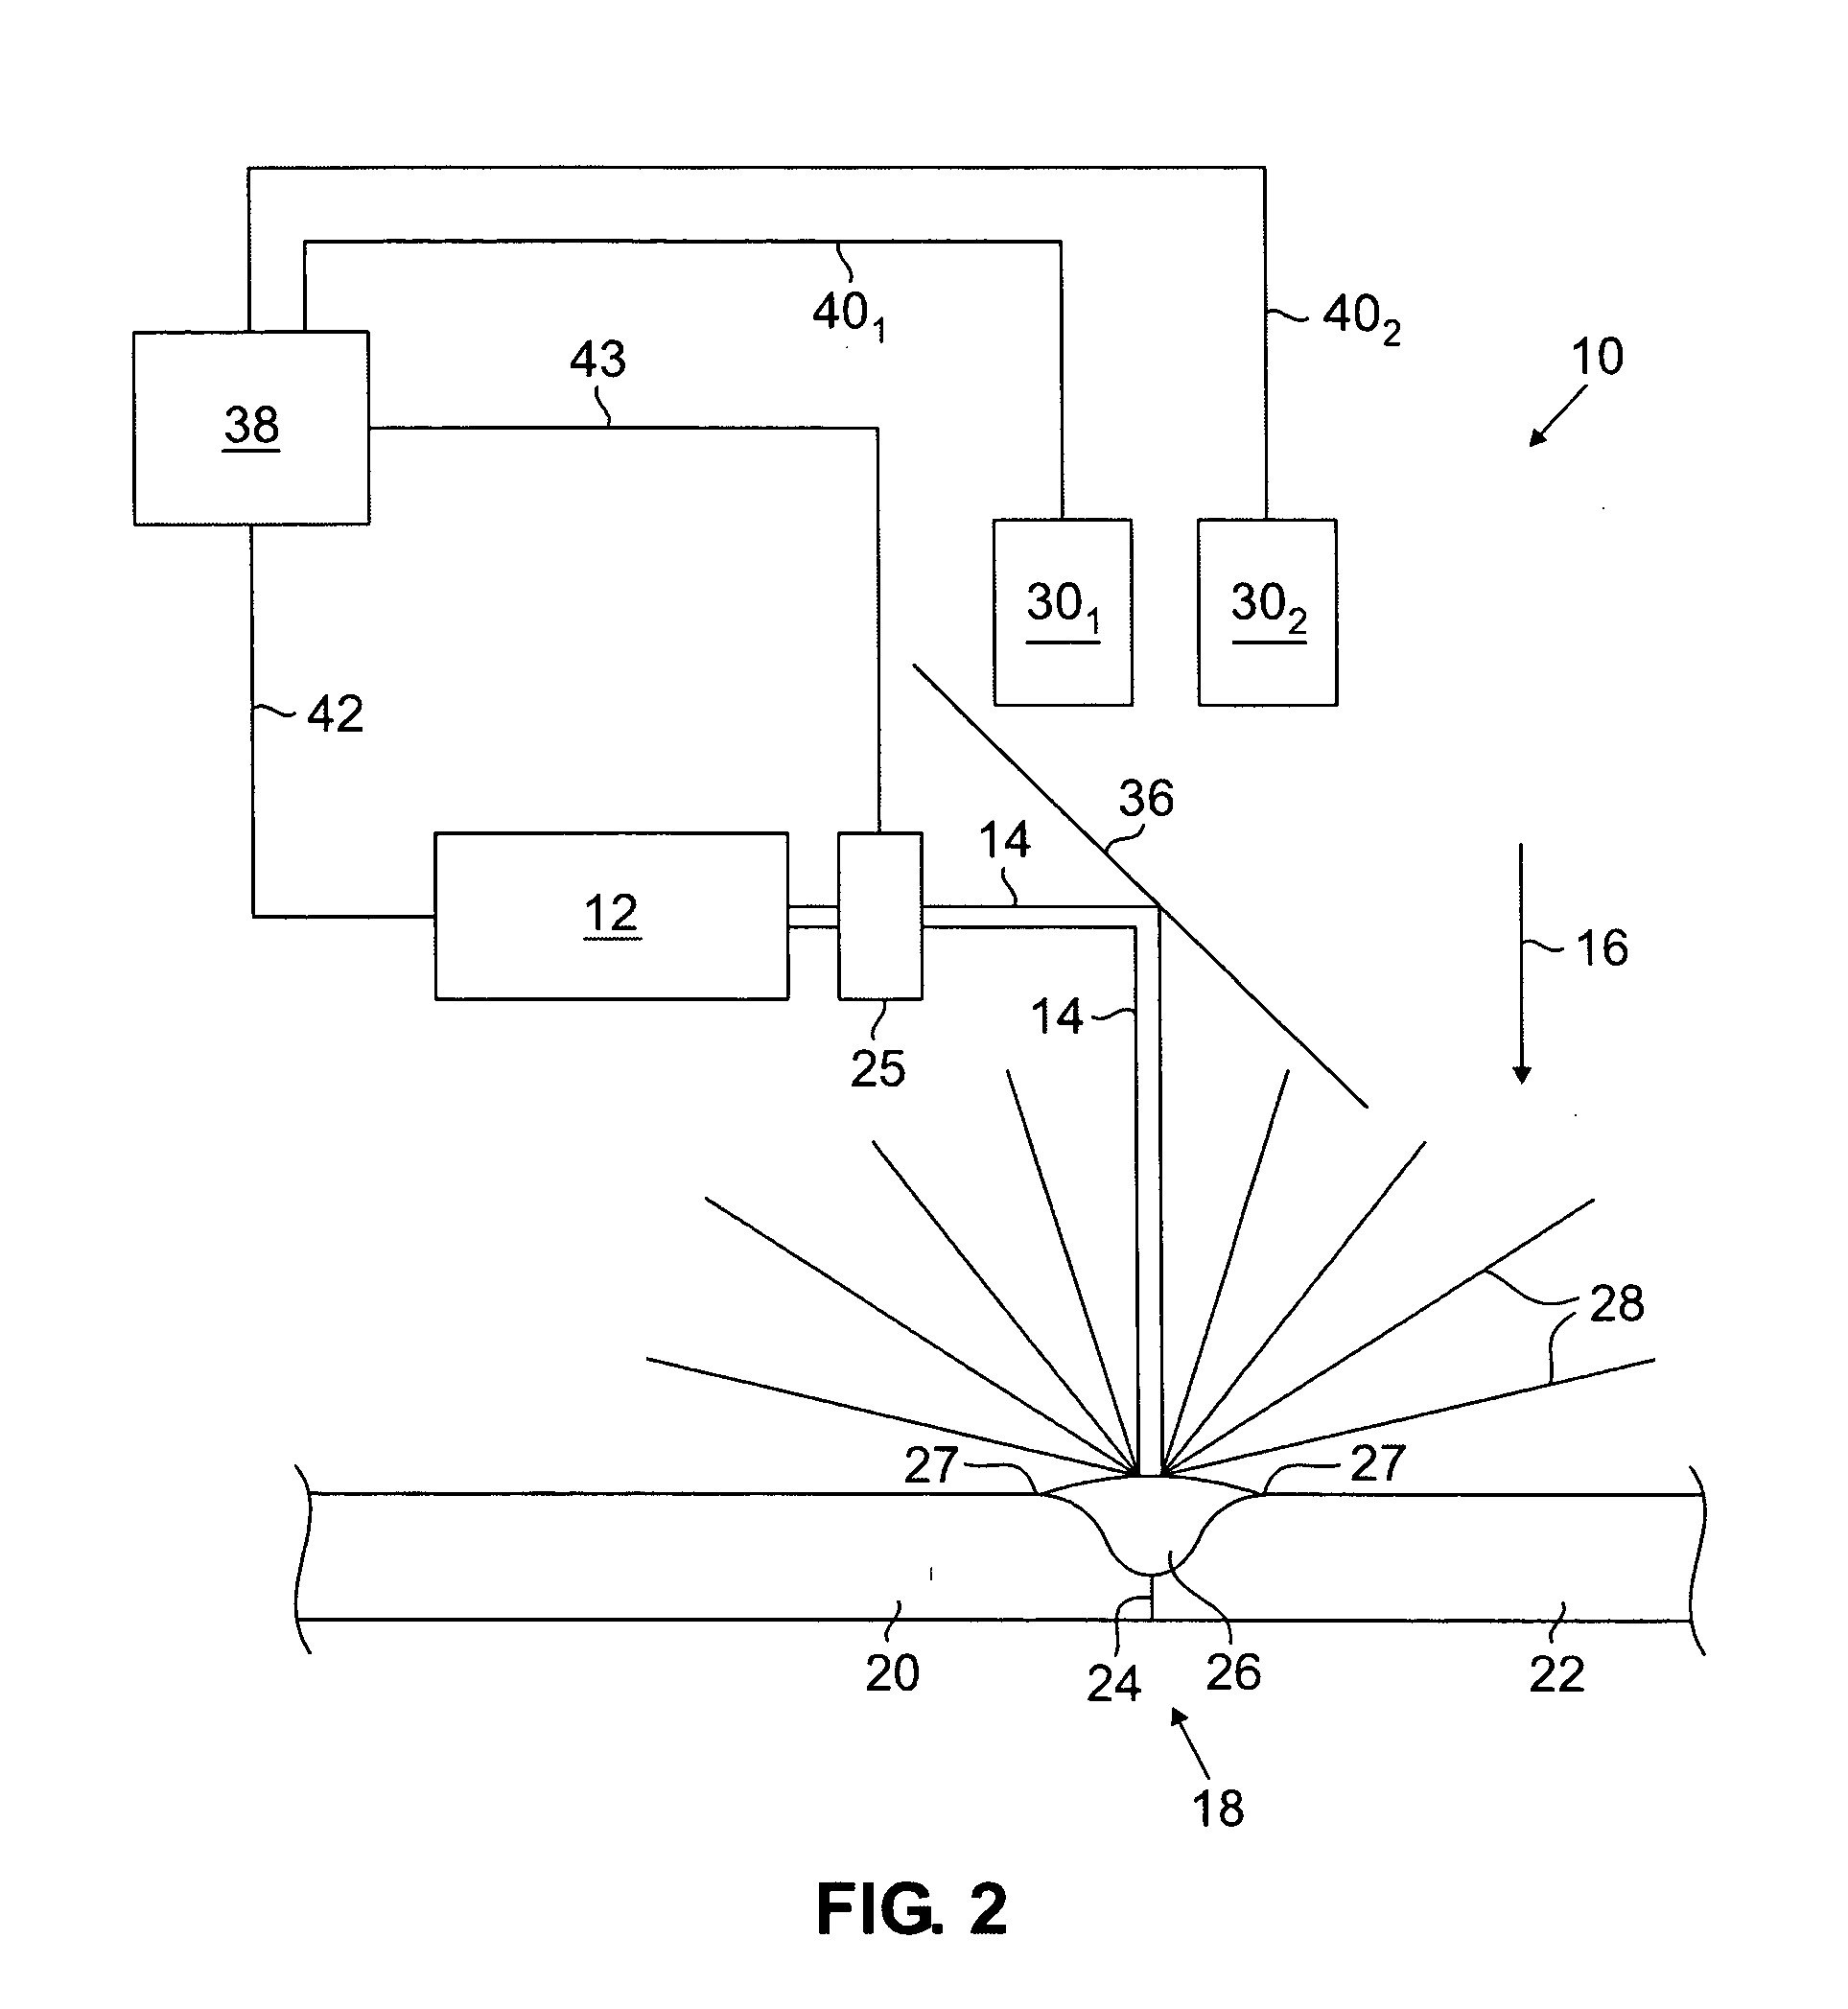 Method and apparatus for controlling and adjusting the intensity profile of a laser beam employed in a laser welder for welding polymeric and metallic components